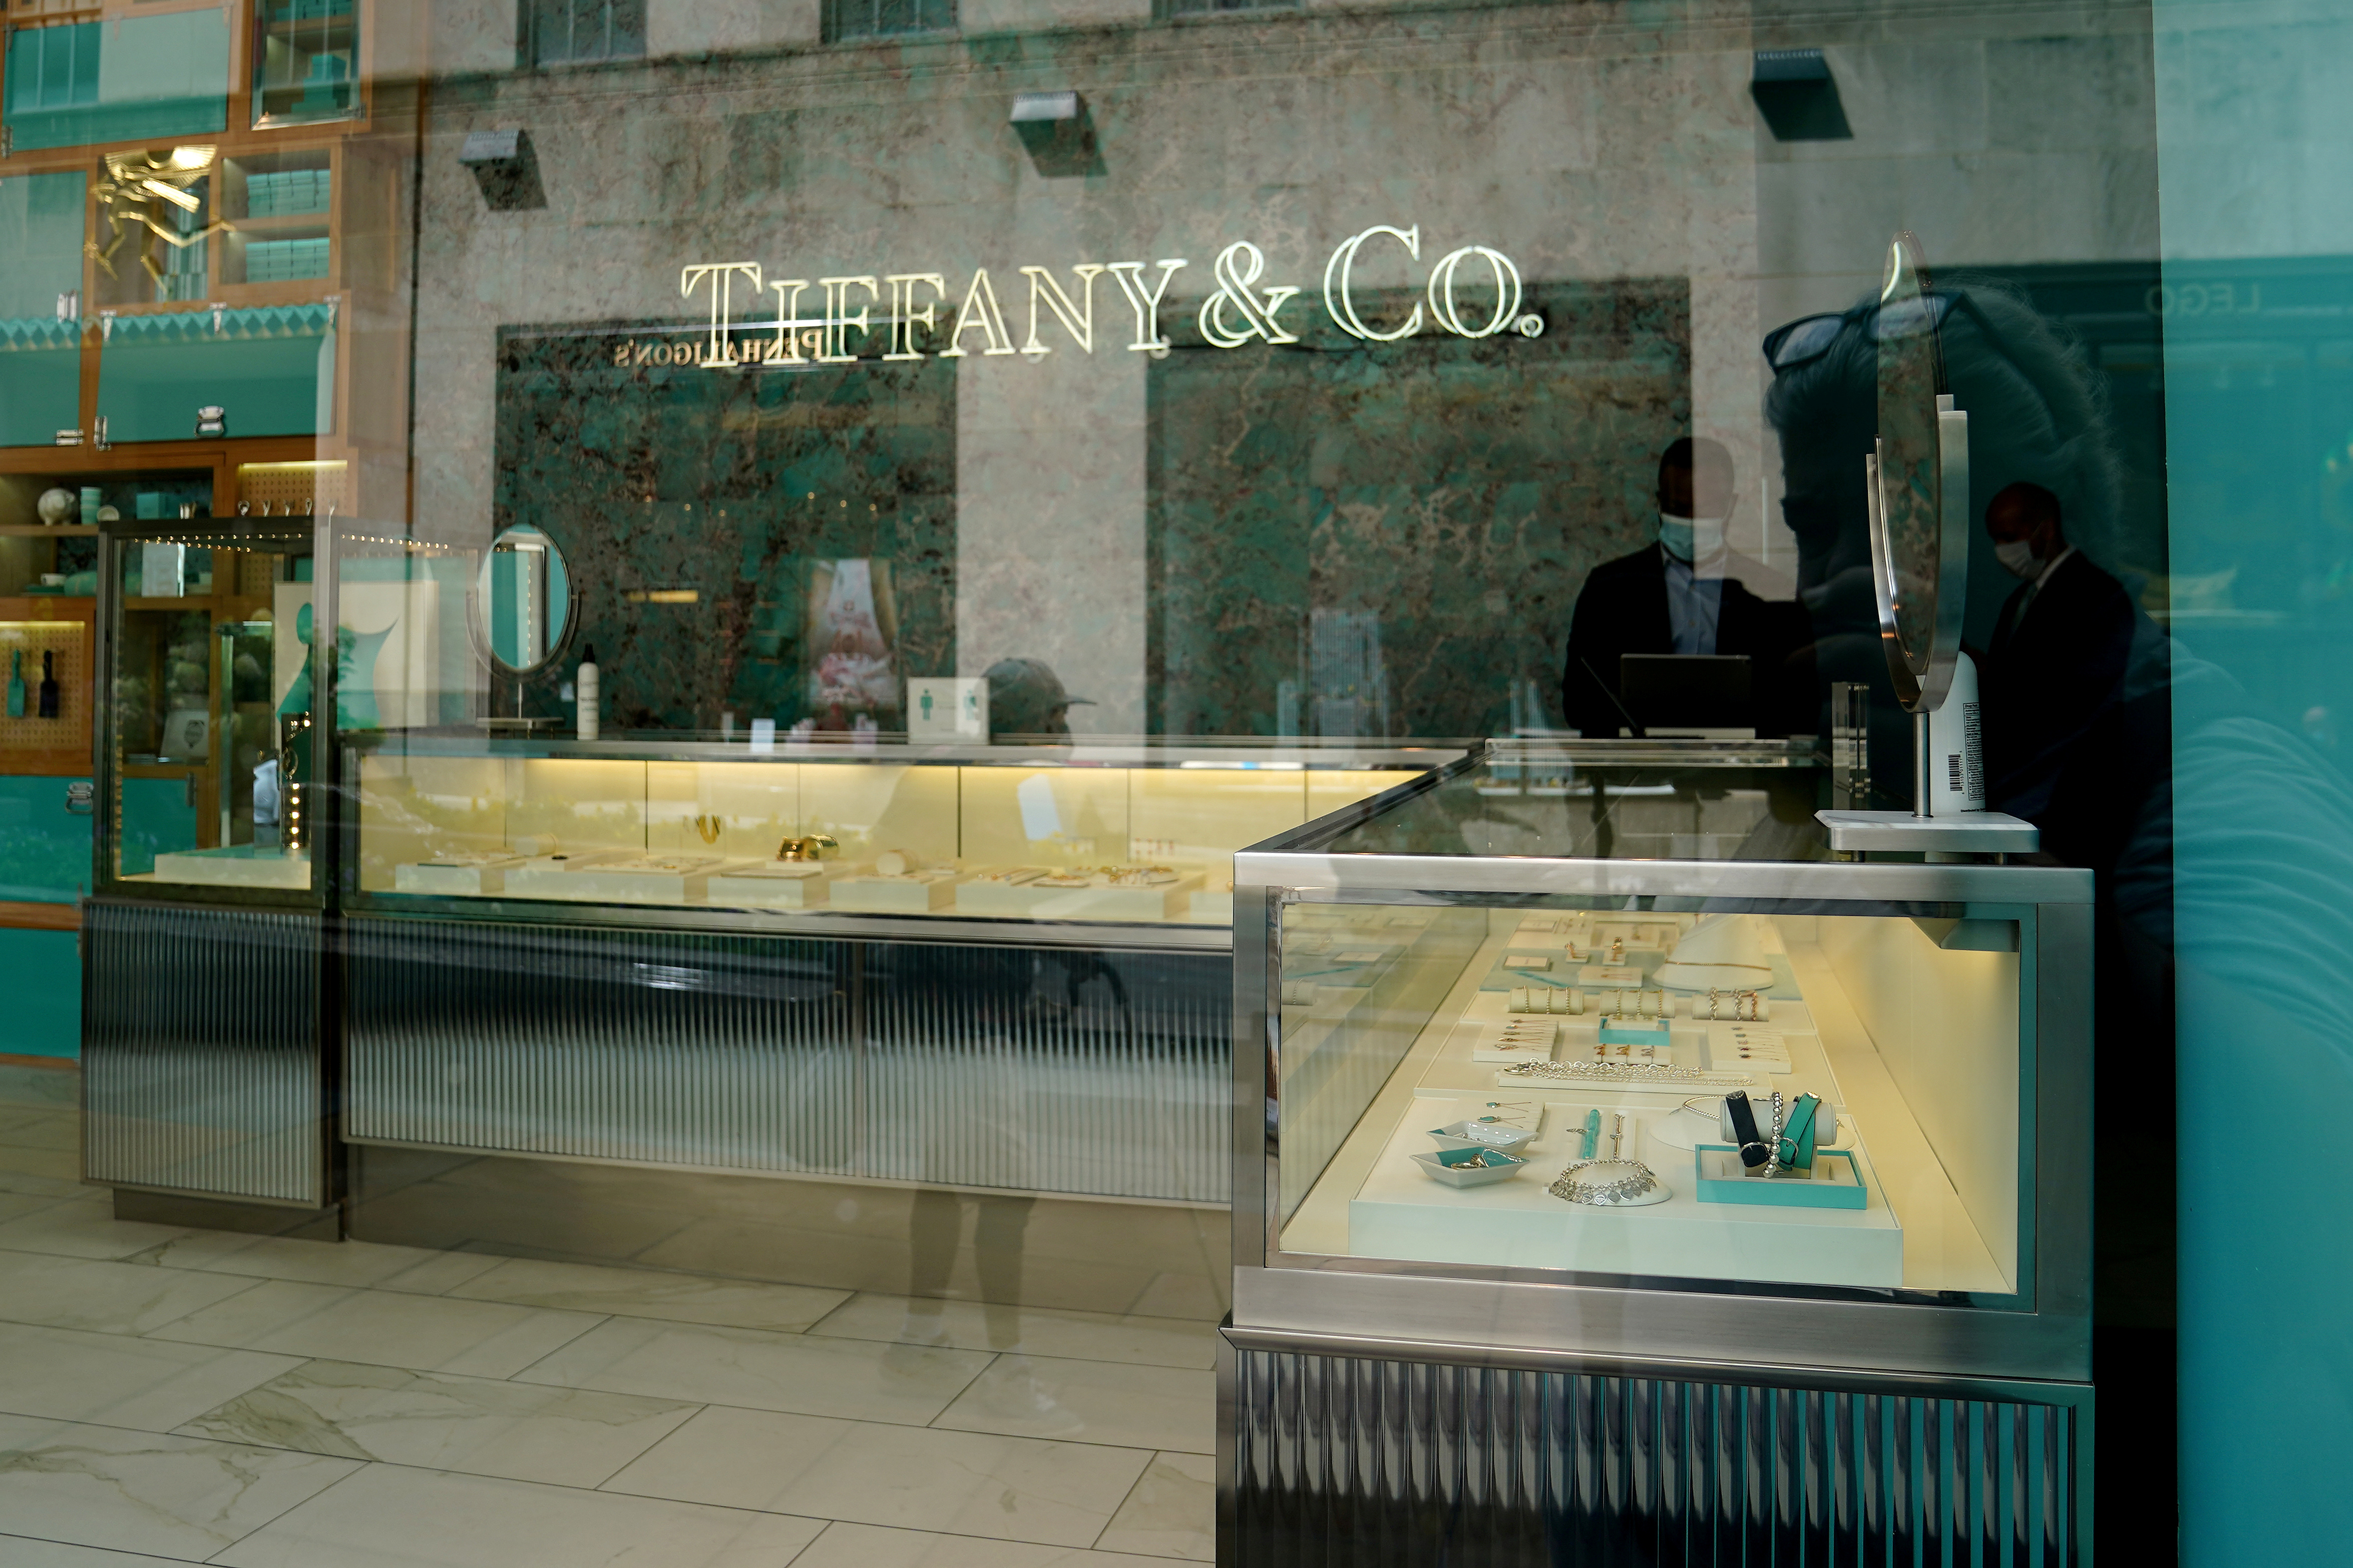 Focus: More carats and sparkle: How LVMH plans to change Tiffany